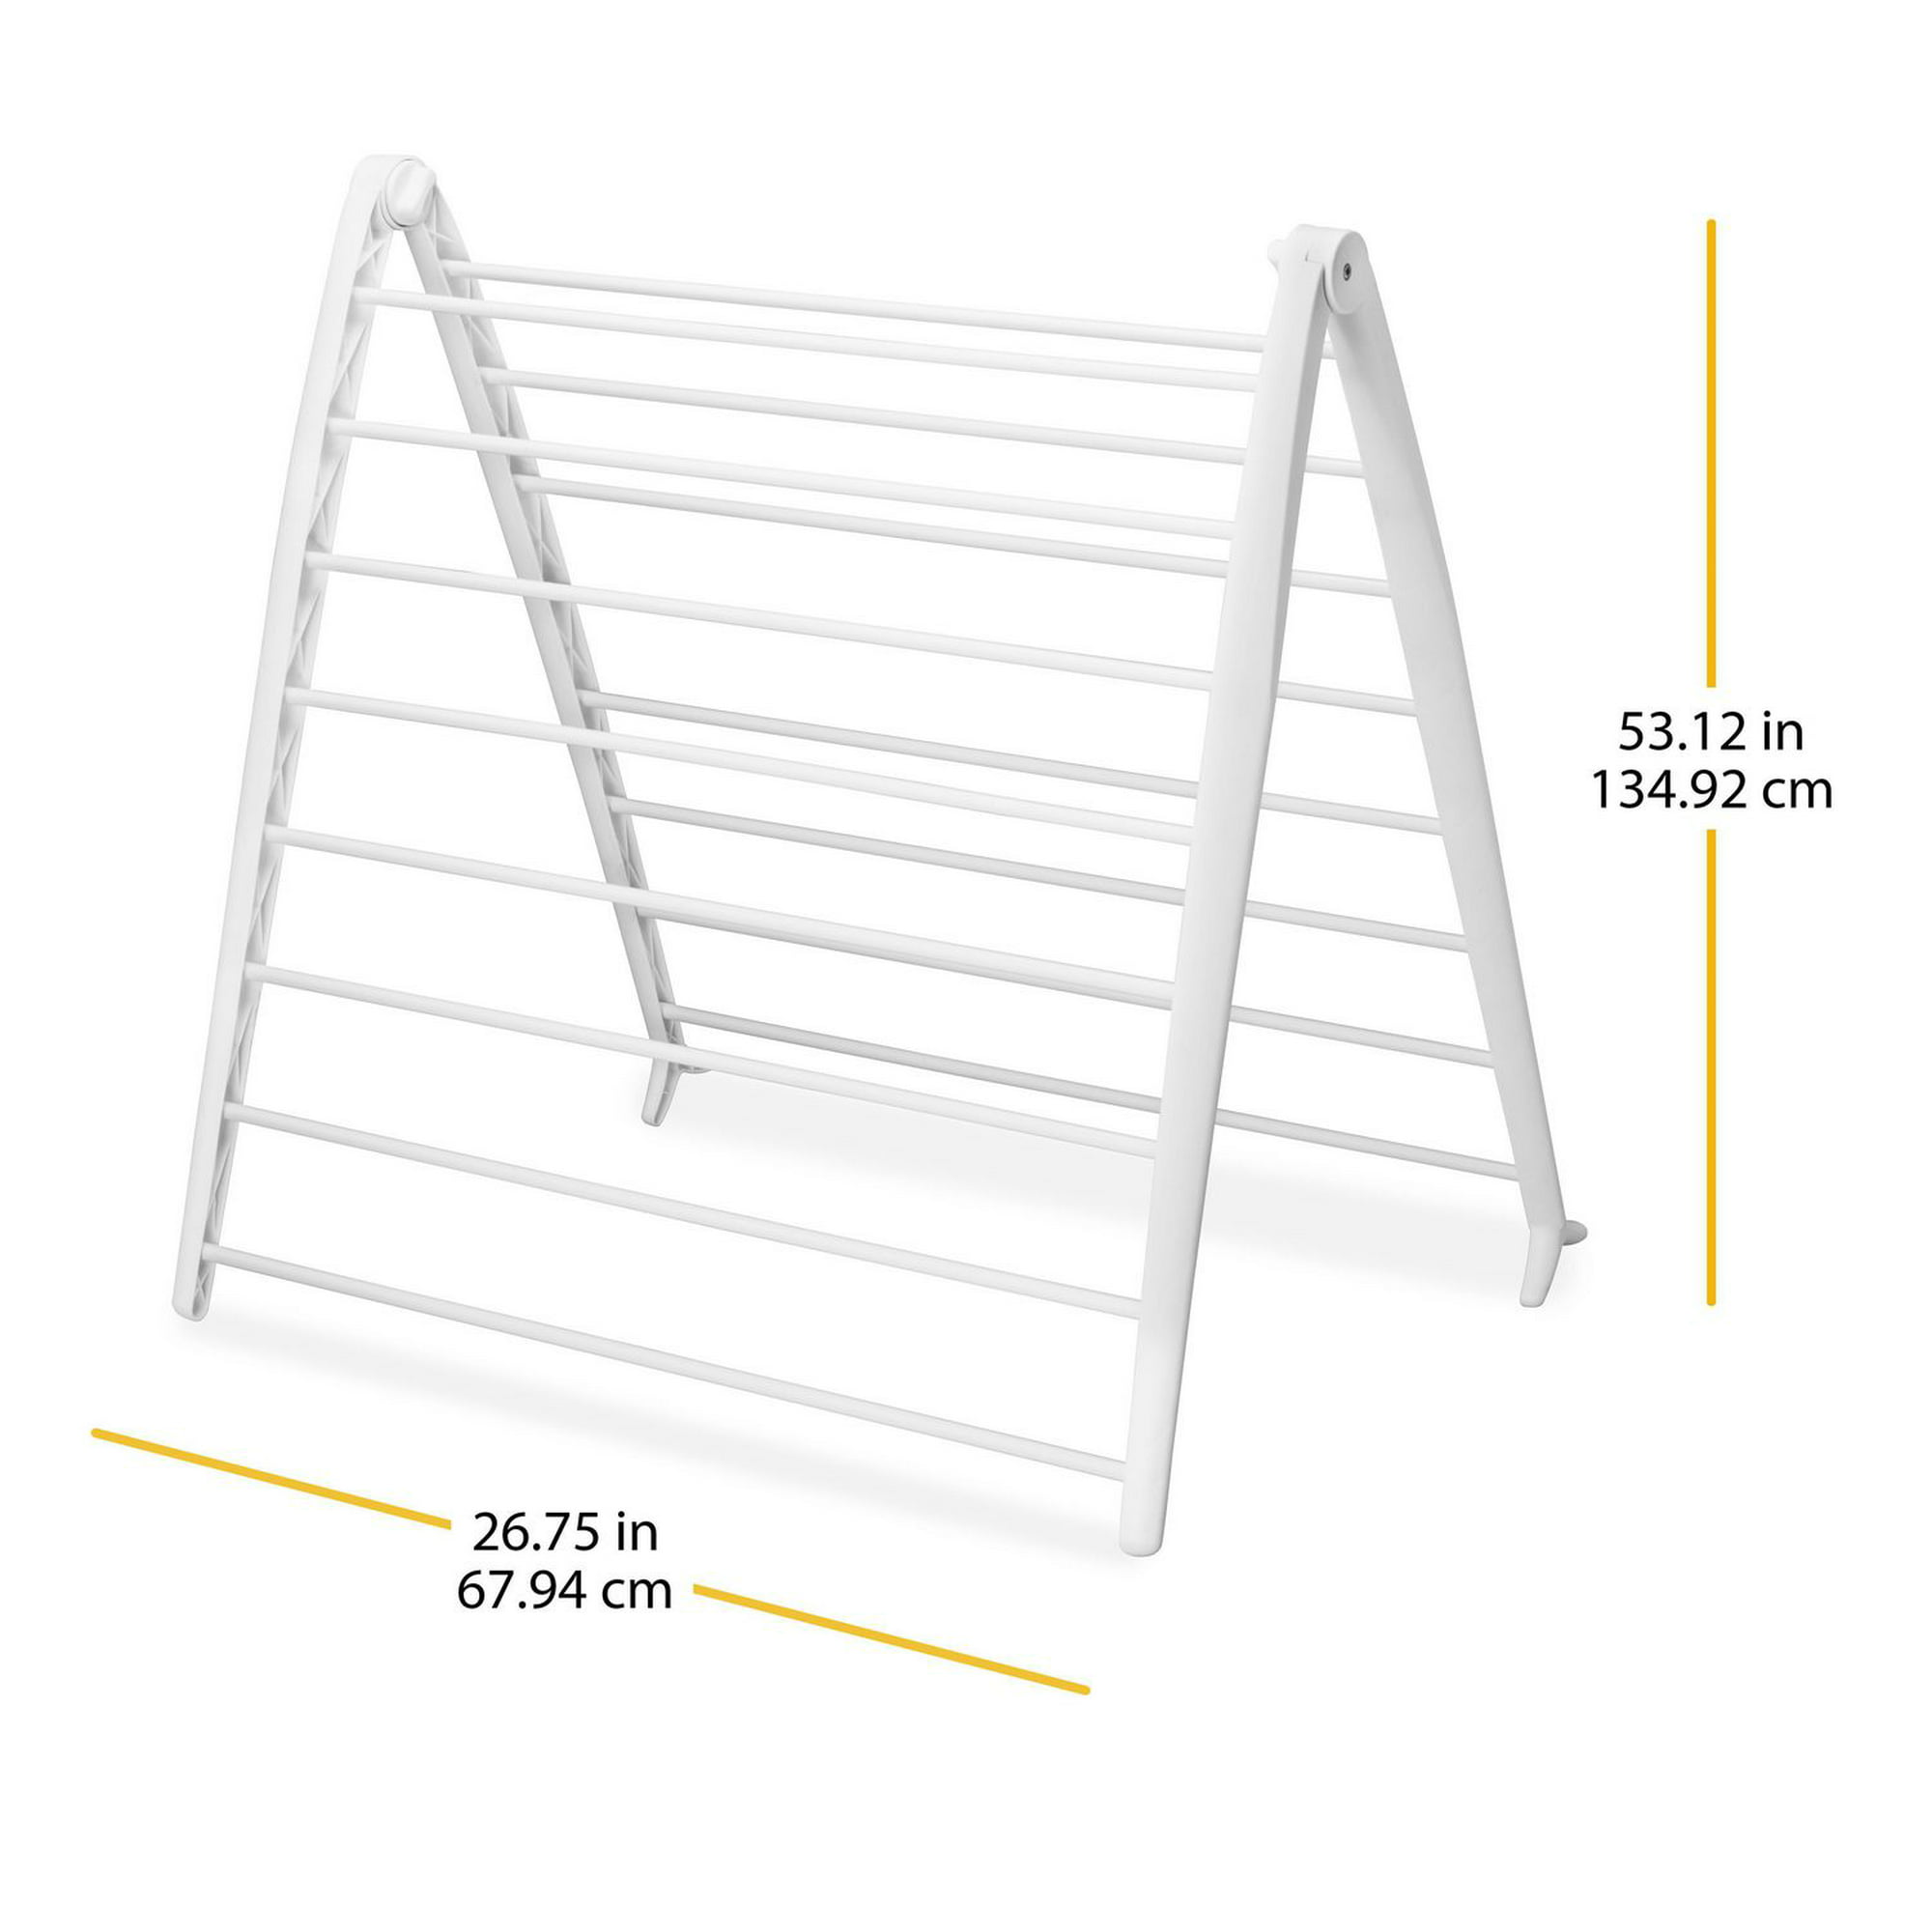 Retractable Clothes Drying Rack, Space Saving Foldable Design